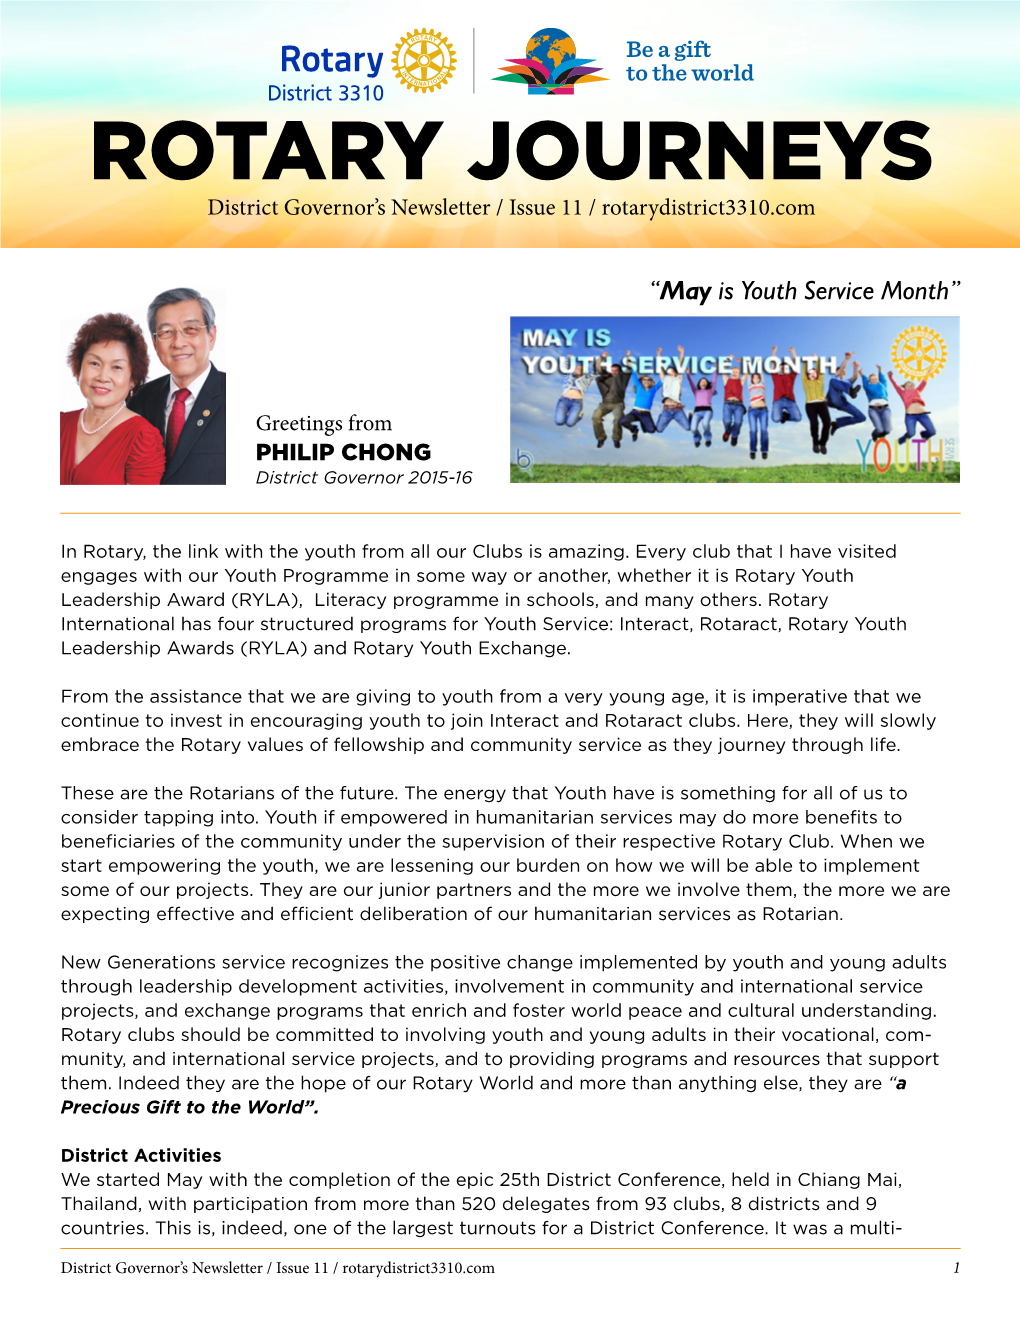 ROTARY JOURNEYS District Governor’S Newsletter / Issue 11 / Rotarydistrict3310.Com